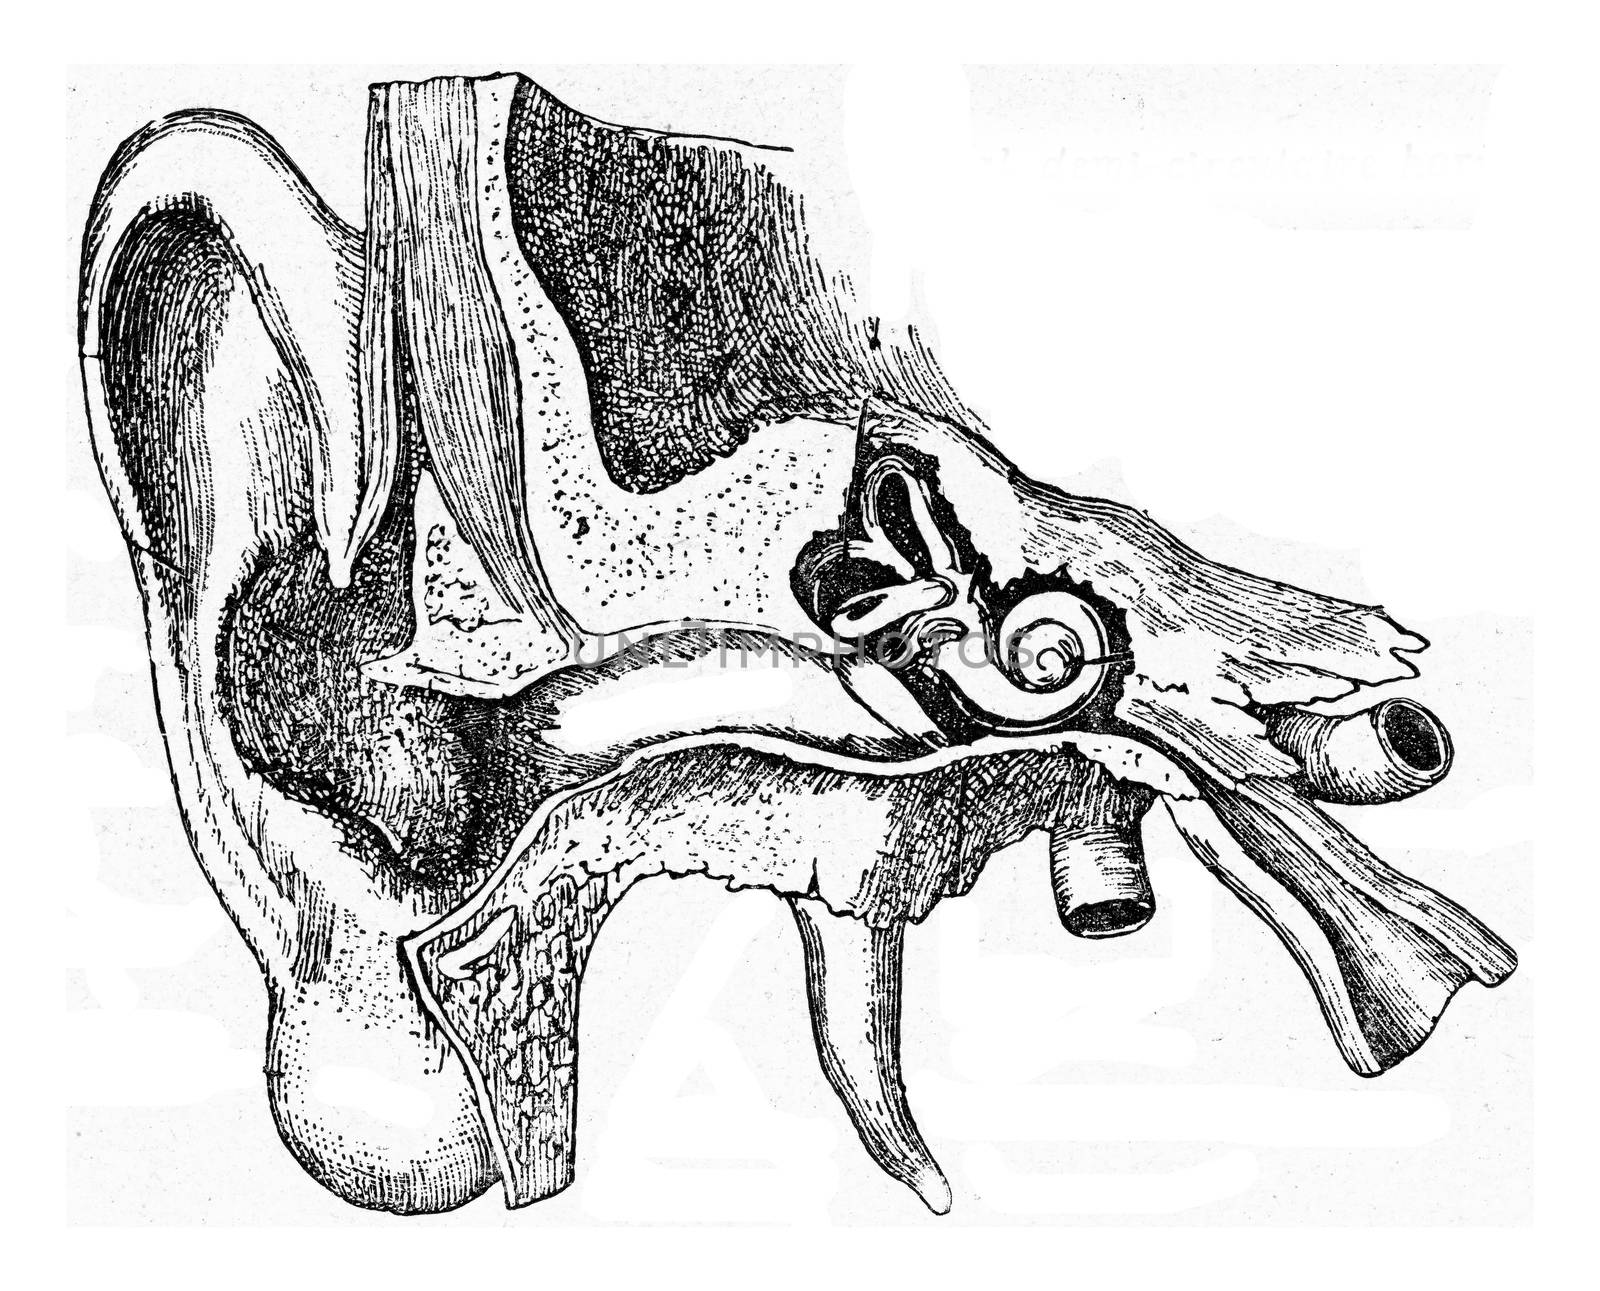 Construction of the human ear, vintage engraved illustration. From the Universe and Humanity, 1910.
